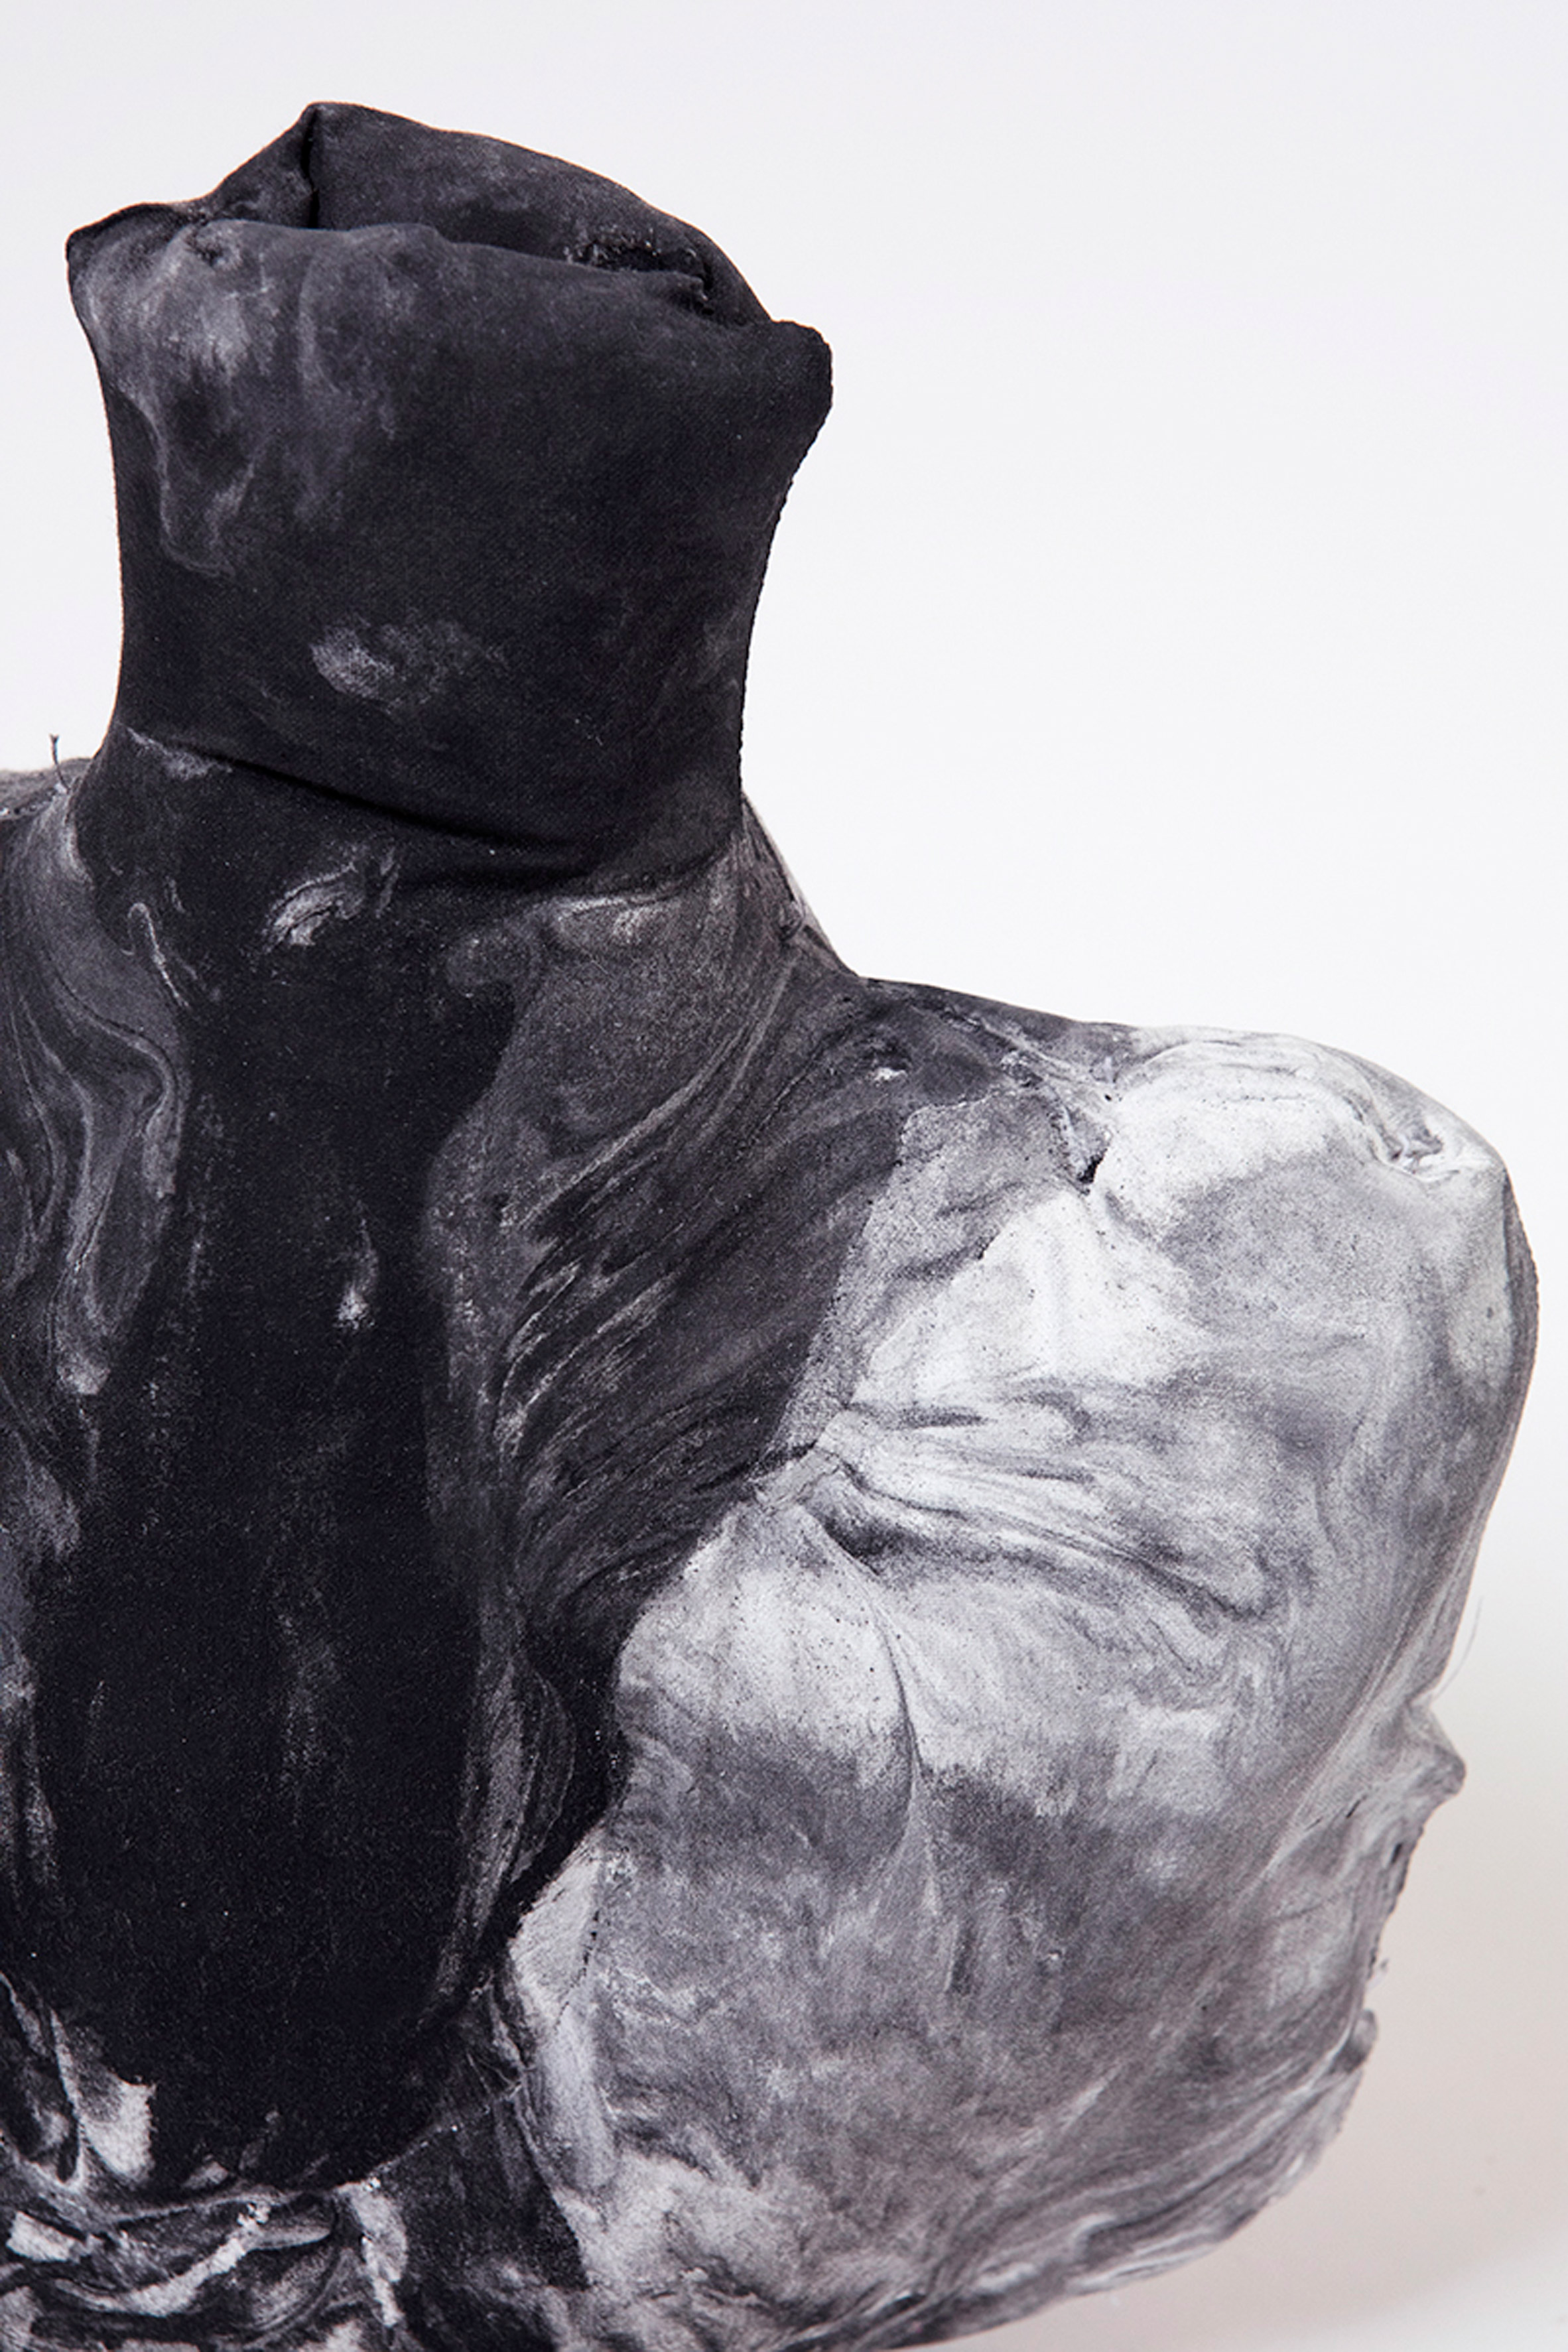 Julia Olanders makes "toxic" vases from insulation foam and concrete